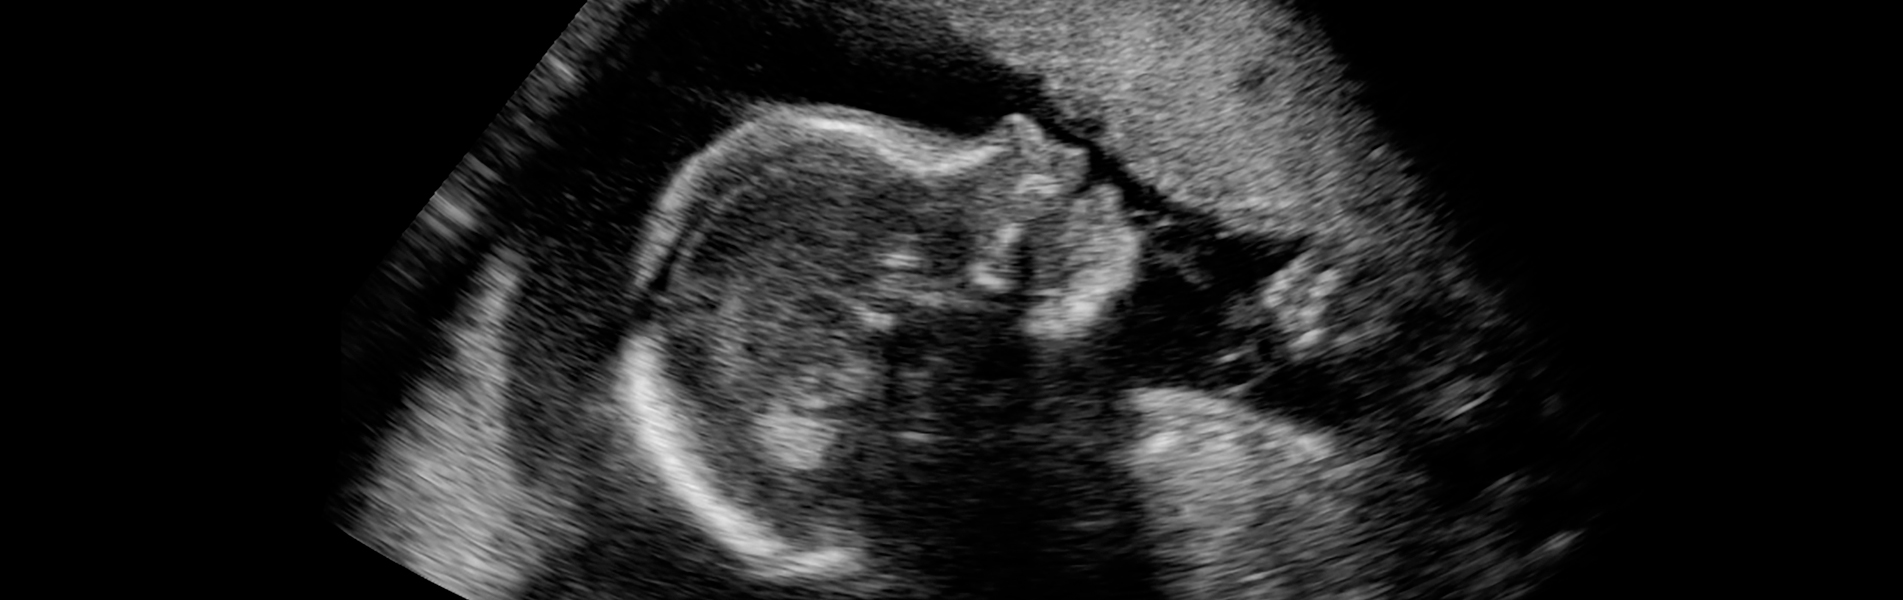 Abortion lobby’s lies exposed